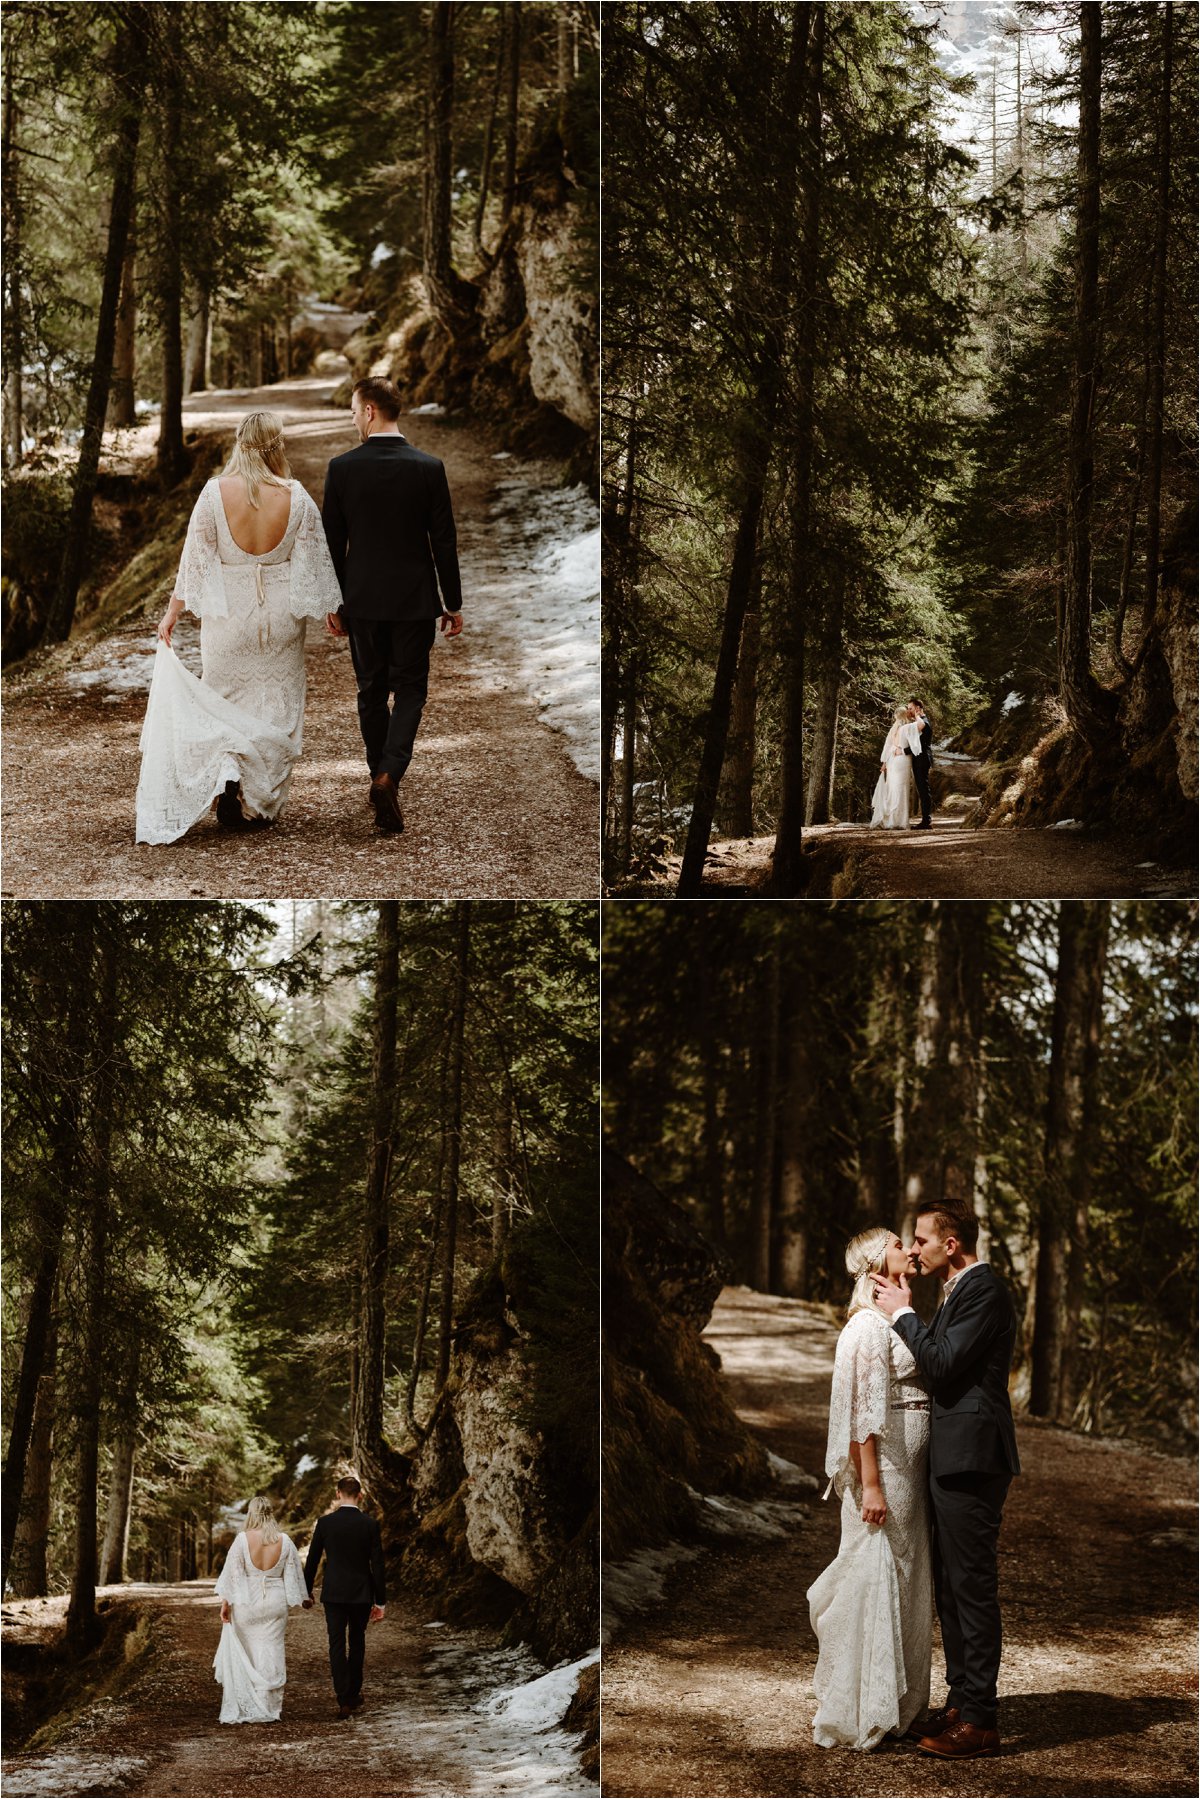 Erika & Nathan walk along the wooded footpaths around Lago di Braies in the Dolomites. Photos by Wild Connections Photography